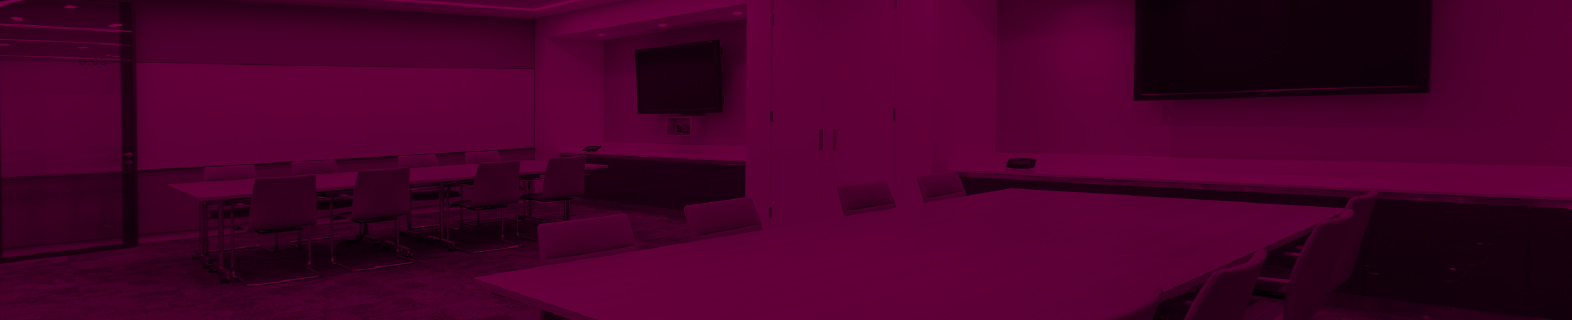 Get in touch header image - duotone of meeting rooms